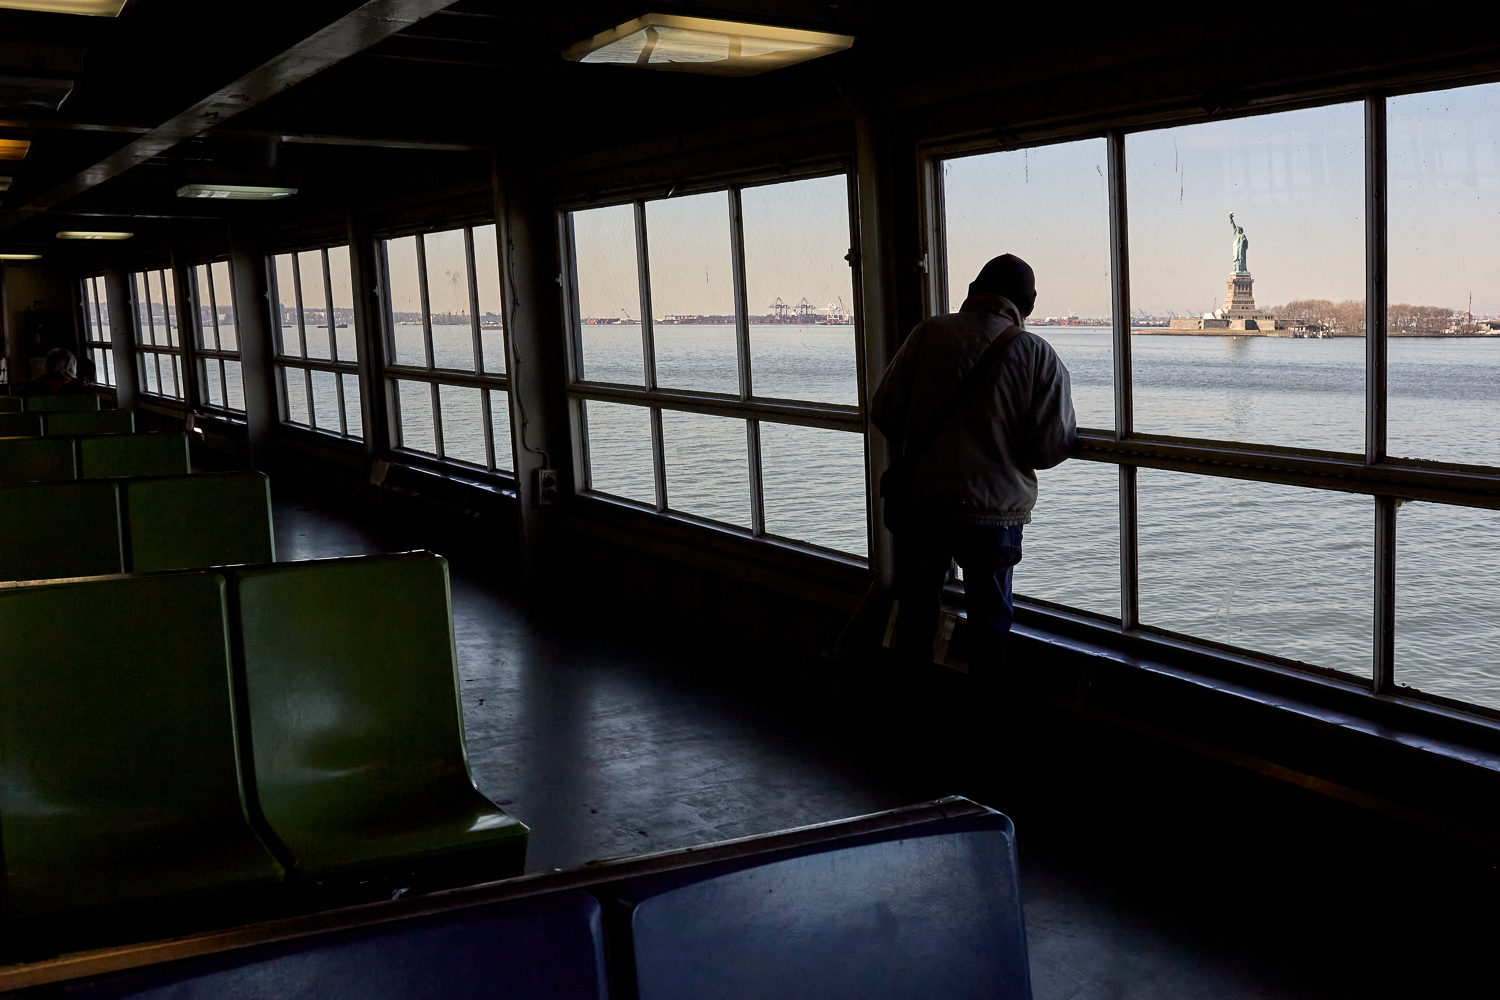 Someone looks out of the window of the Staten Island Ferry. Appears to be early evening.